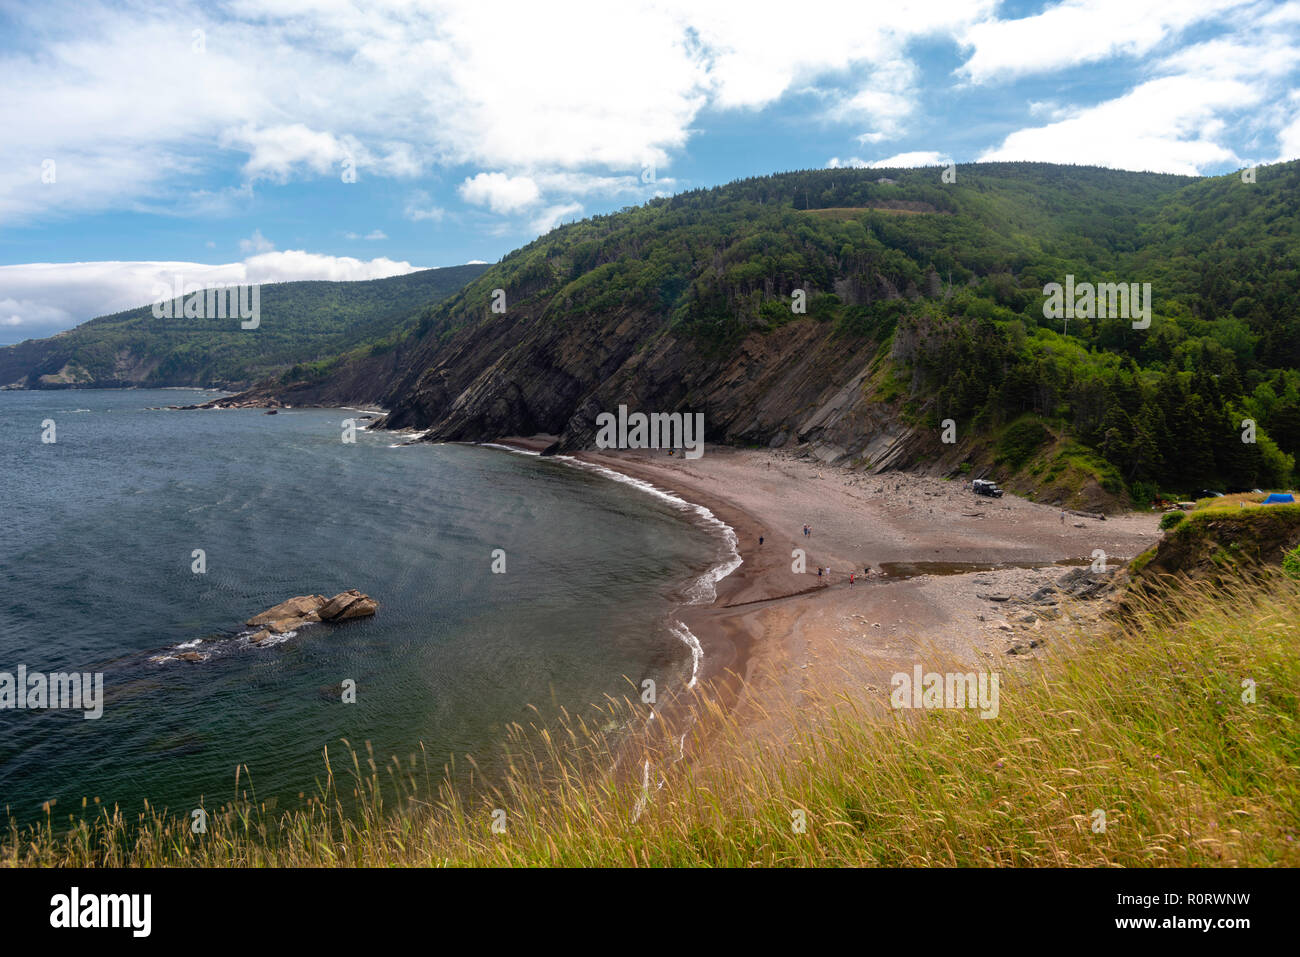 View of the beach at Meat Cove, Nova Scotia, Canada. Stock Photo